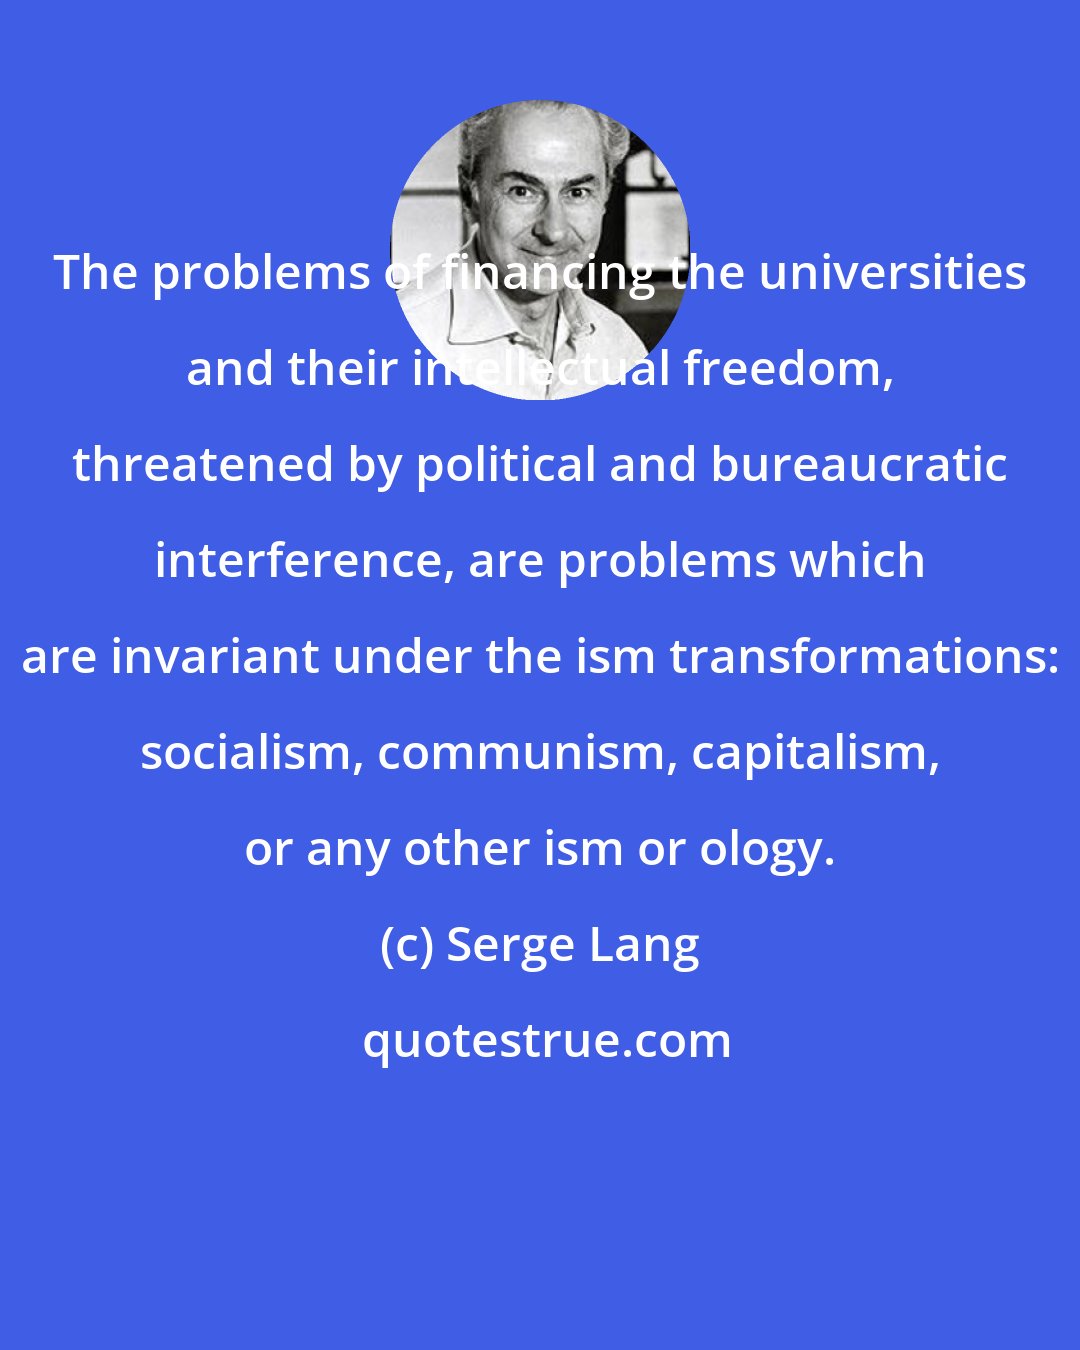 Serge Lang: The problems of financing the universities and their intellectual freedom, threatened by political and bureaucratic interference, are problems which are invariant under the ism transformations: socialism, communism, capitalism, or any other ism or ology.